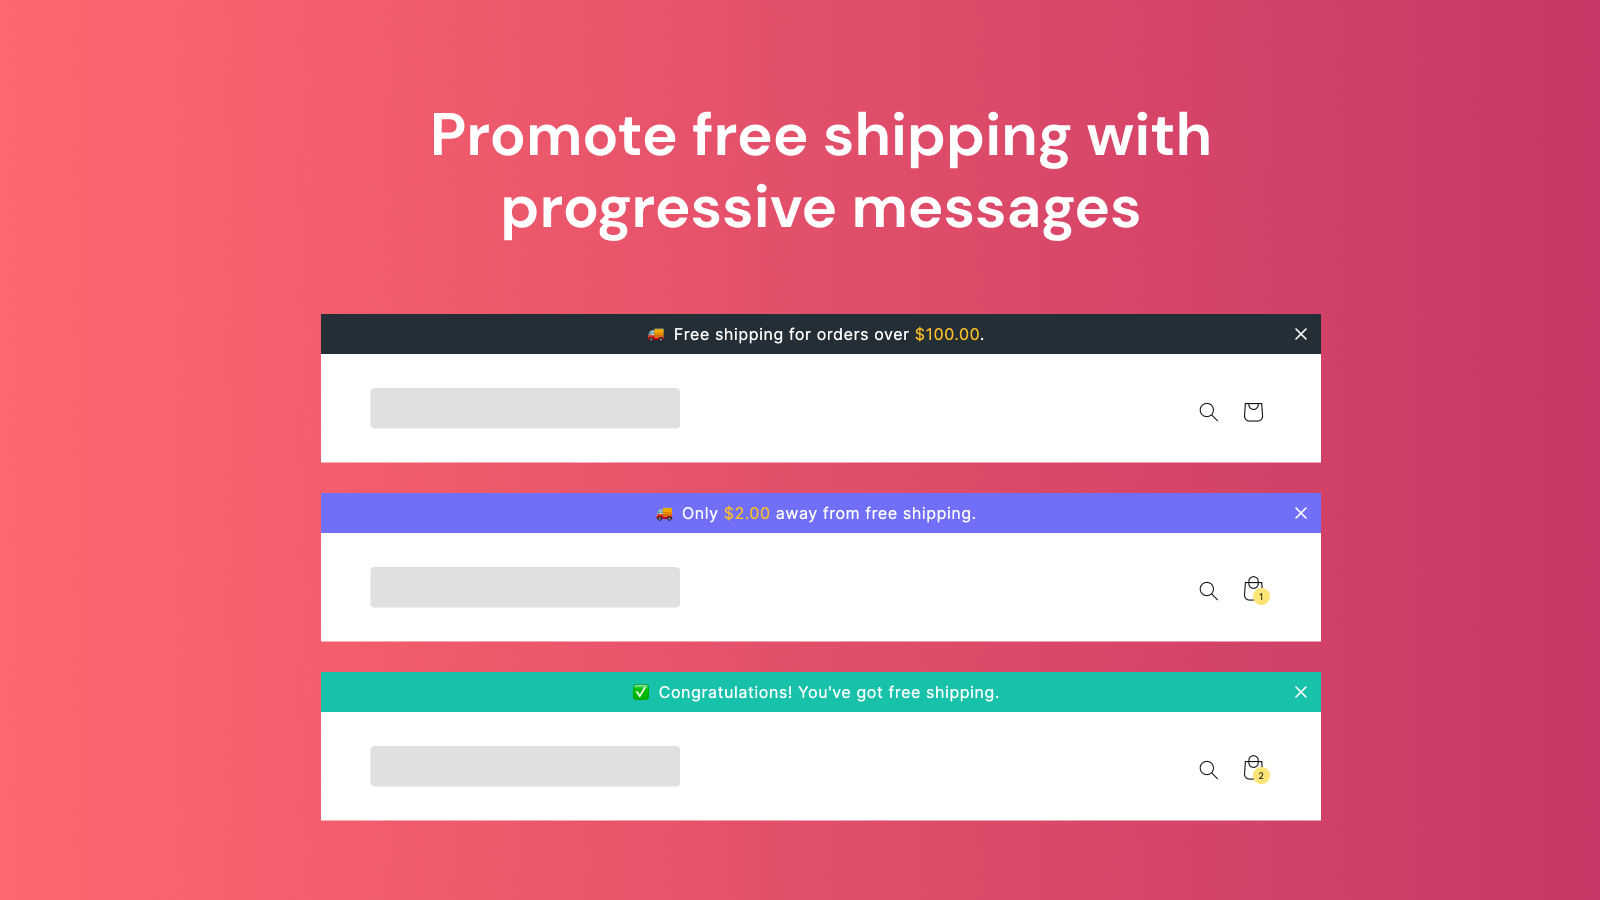 Promote free shipping with progressive messages